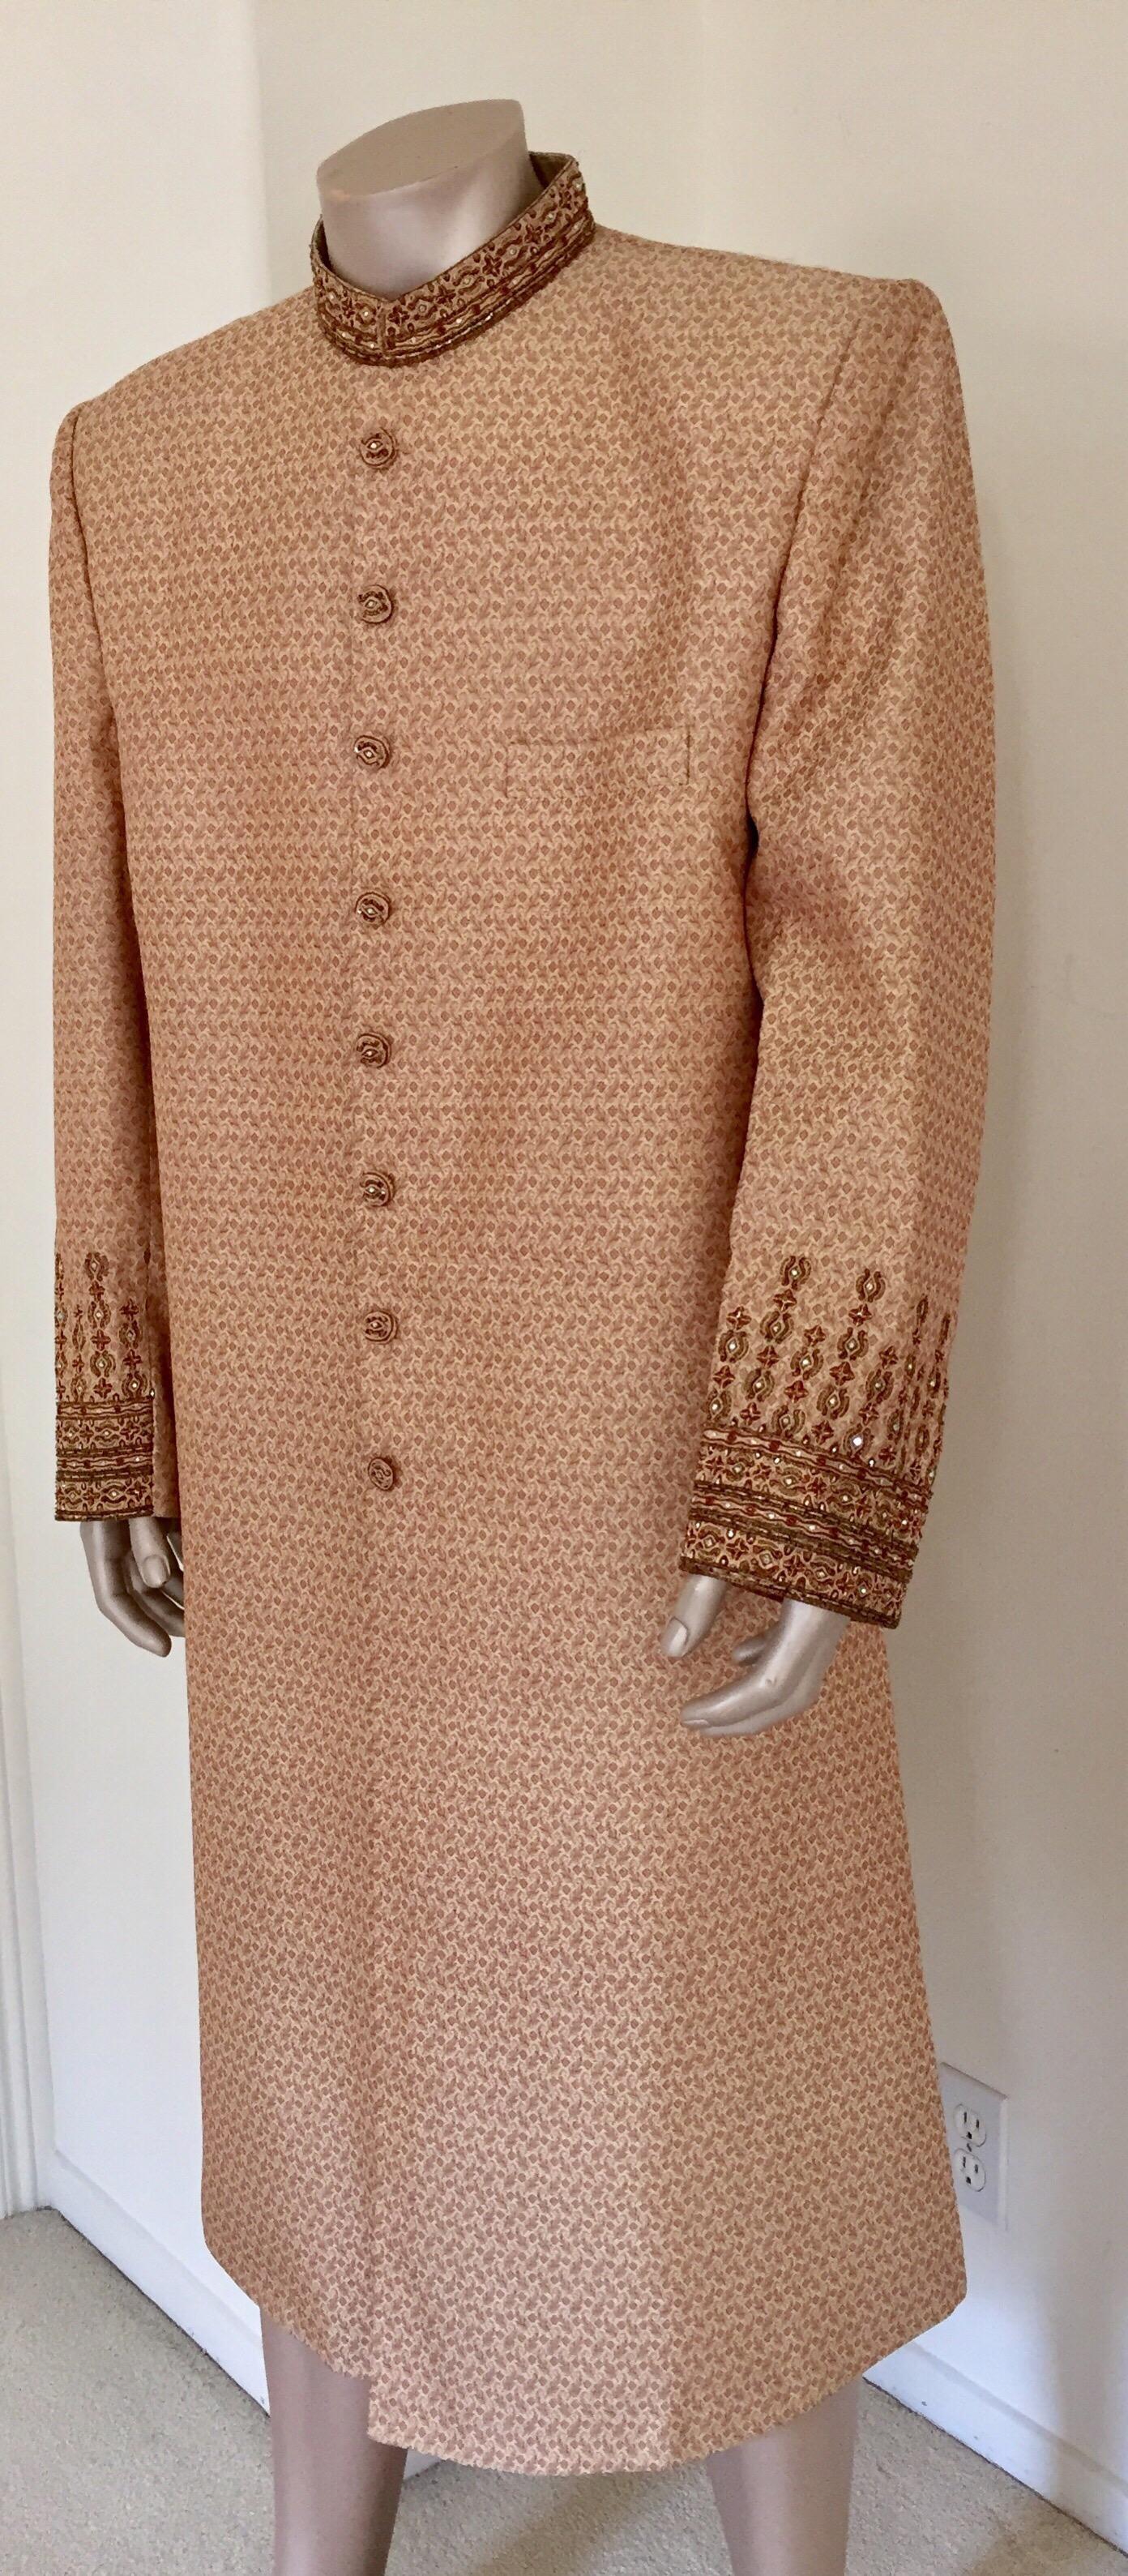 Gold Brocade Gentleman Indian Wedding or Party Maharaja Sultan Tuxedo Coat In Good Condition For Sale In North Hollywood, CA